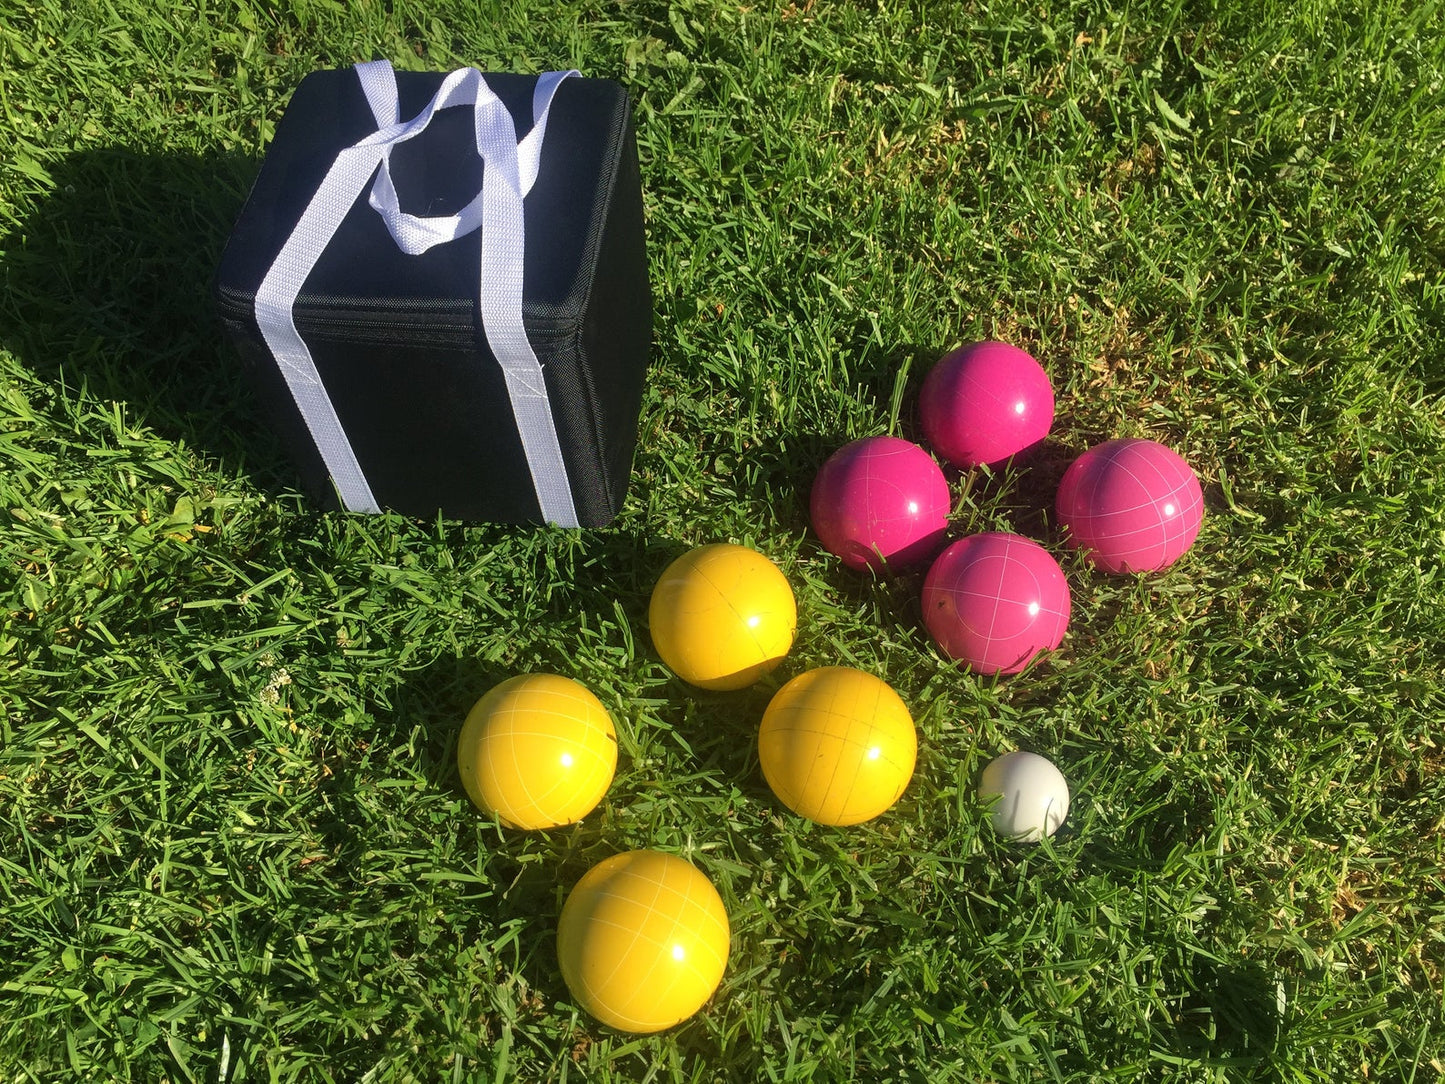 107mm Bocce Pink and Yellow Balls with Black Bag